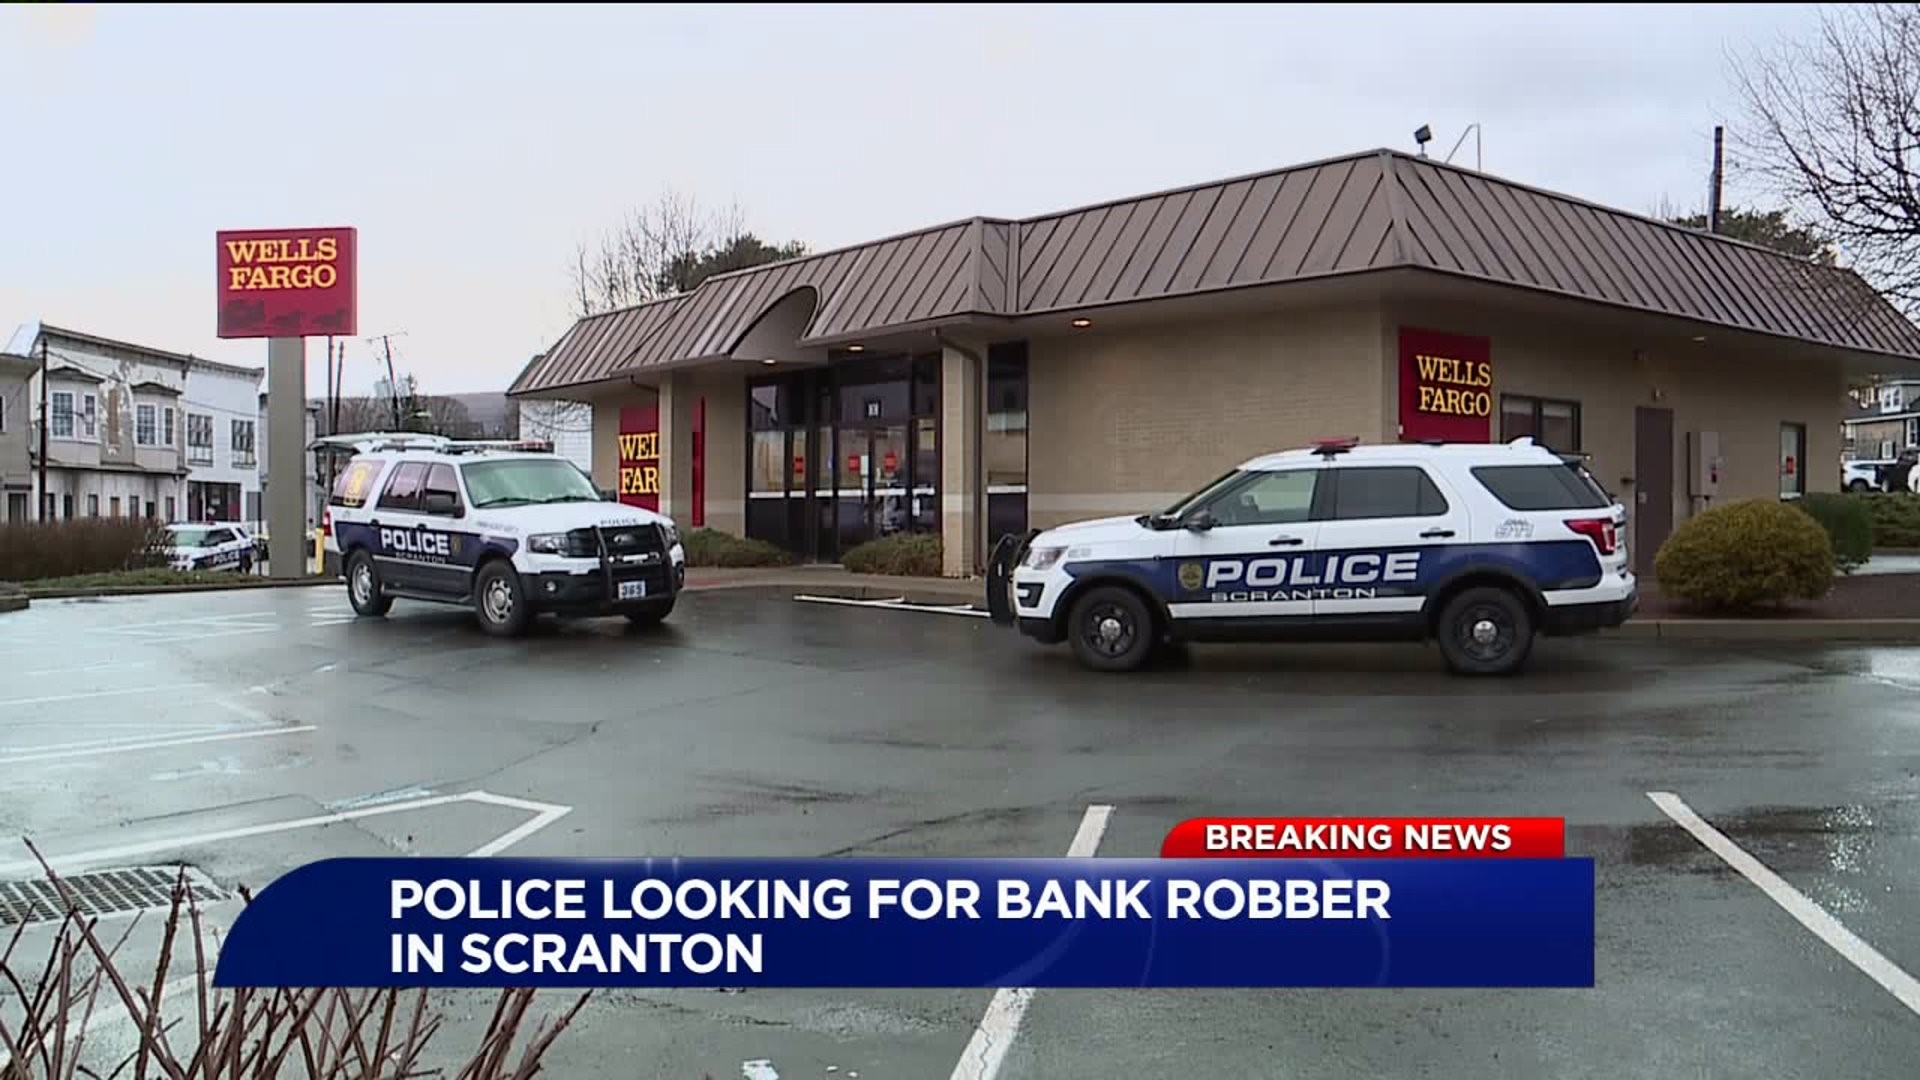 Police Search for Bank Robber in Scranton